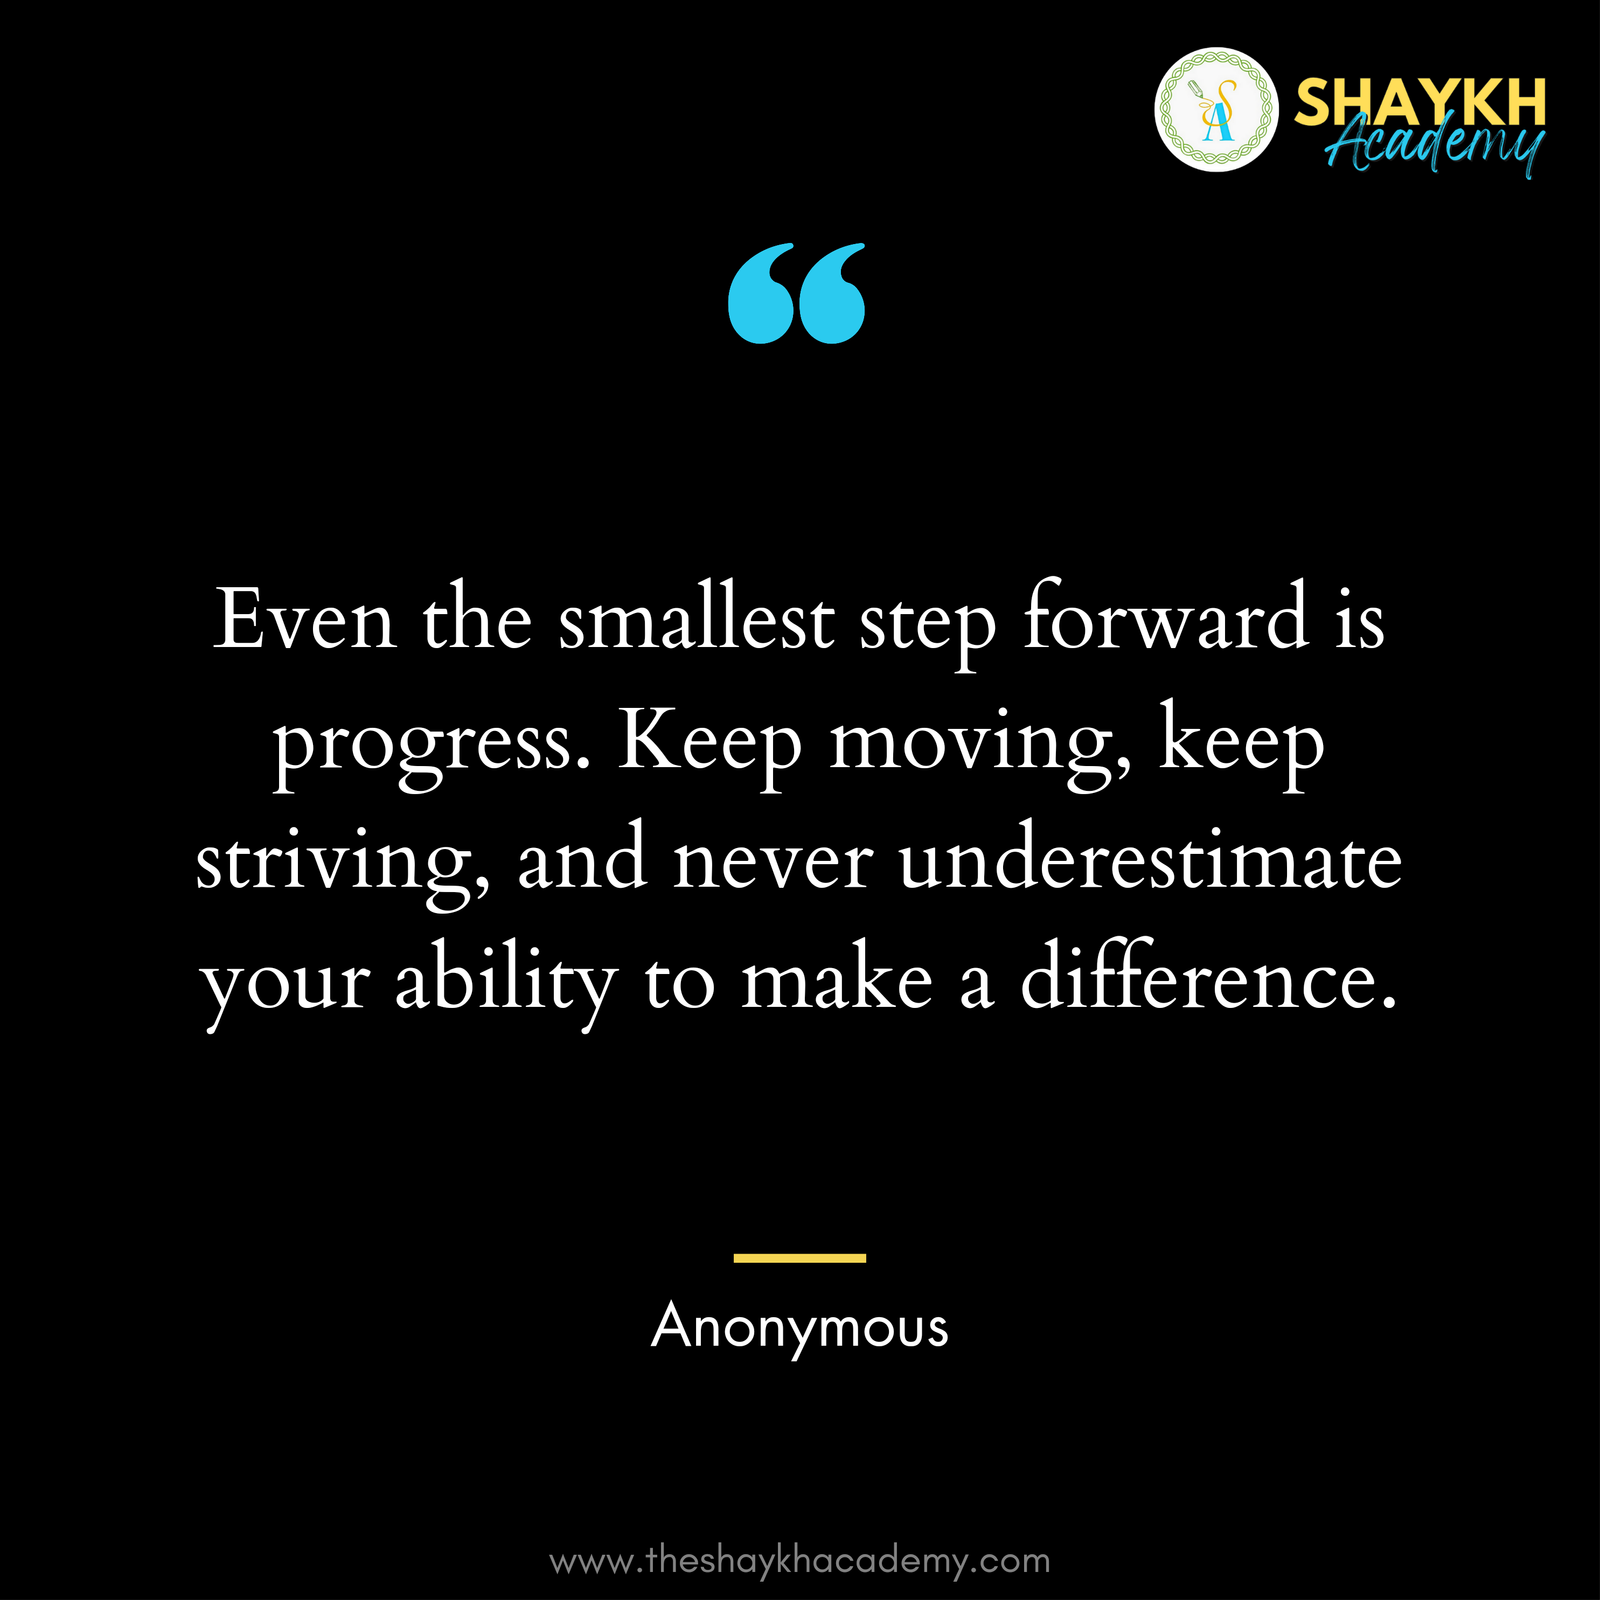 Even the smallest step forward is progress. Keep moving, keep striving, and never underestimate your ability to make a difference.